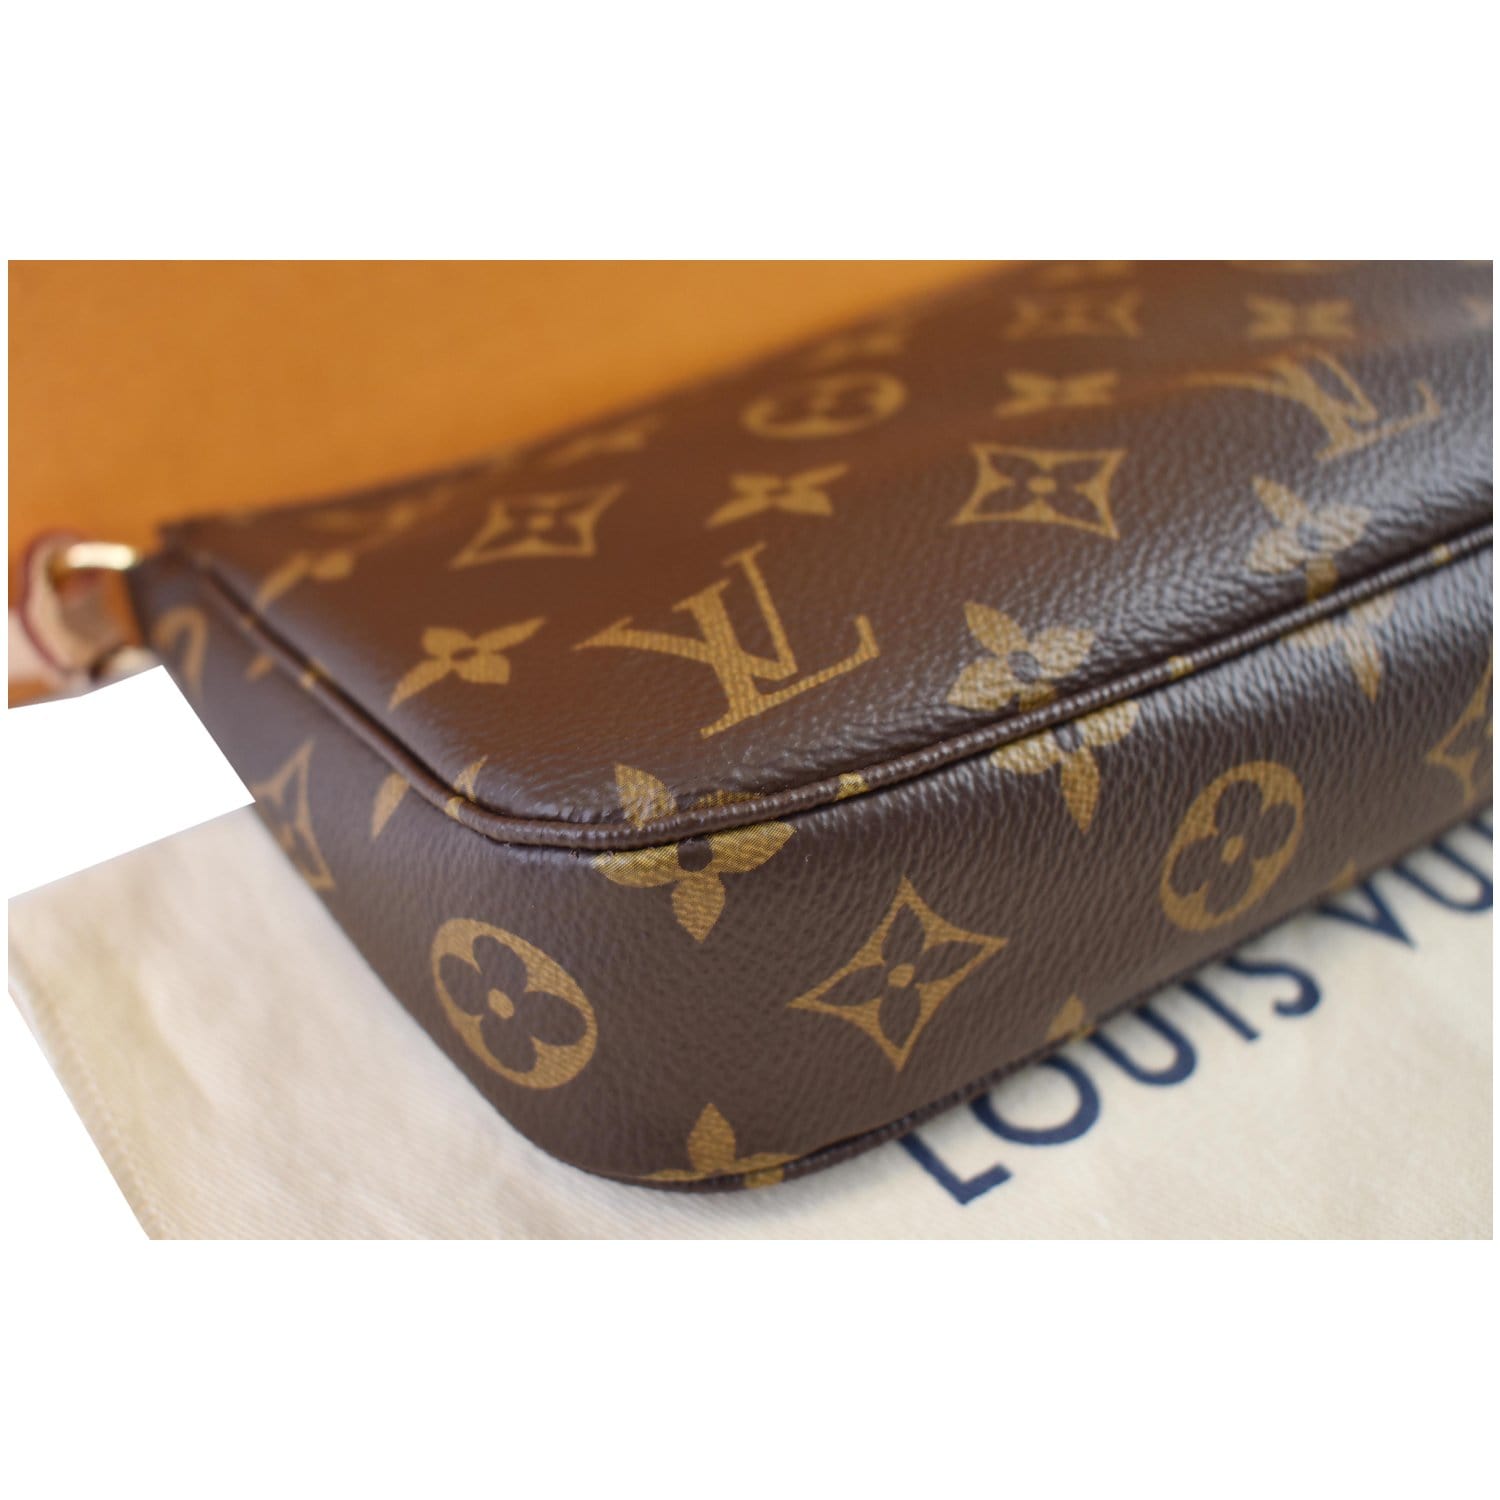 Louis Vuitton Reference numberM40712 luxury vintage bags for sale